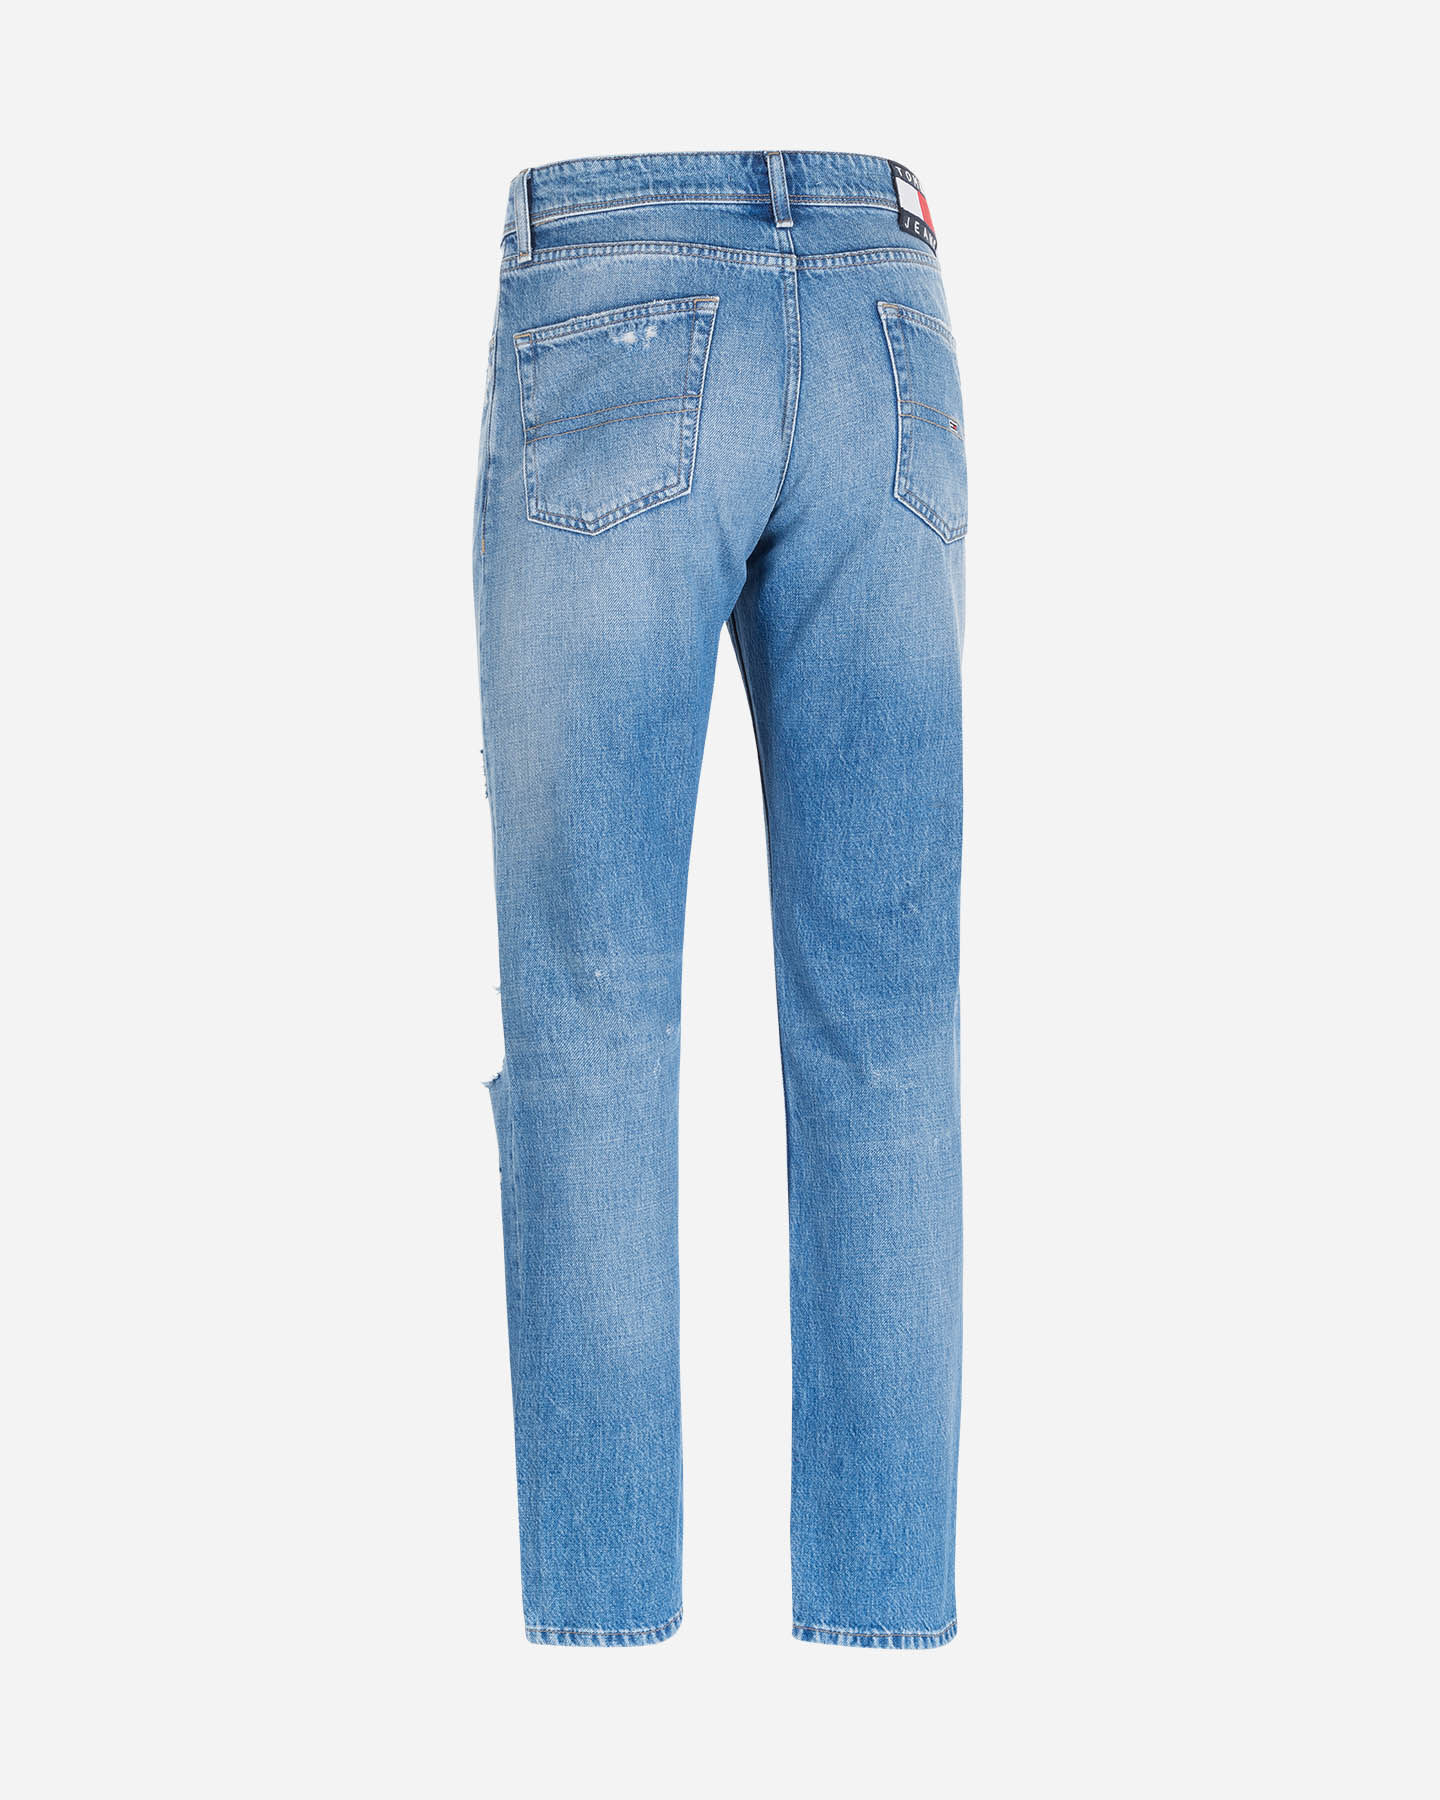  Jeans TOMMY HILFIGER STRAIGHT M S4094551|1AB|28 scatto 1